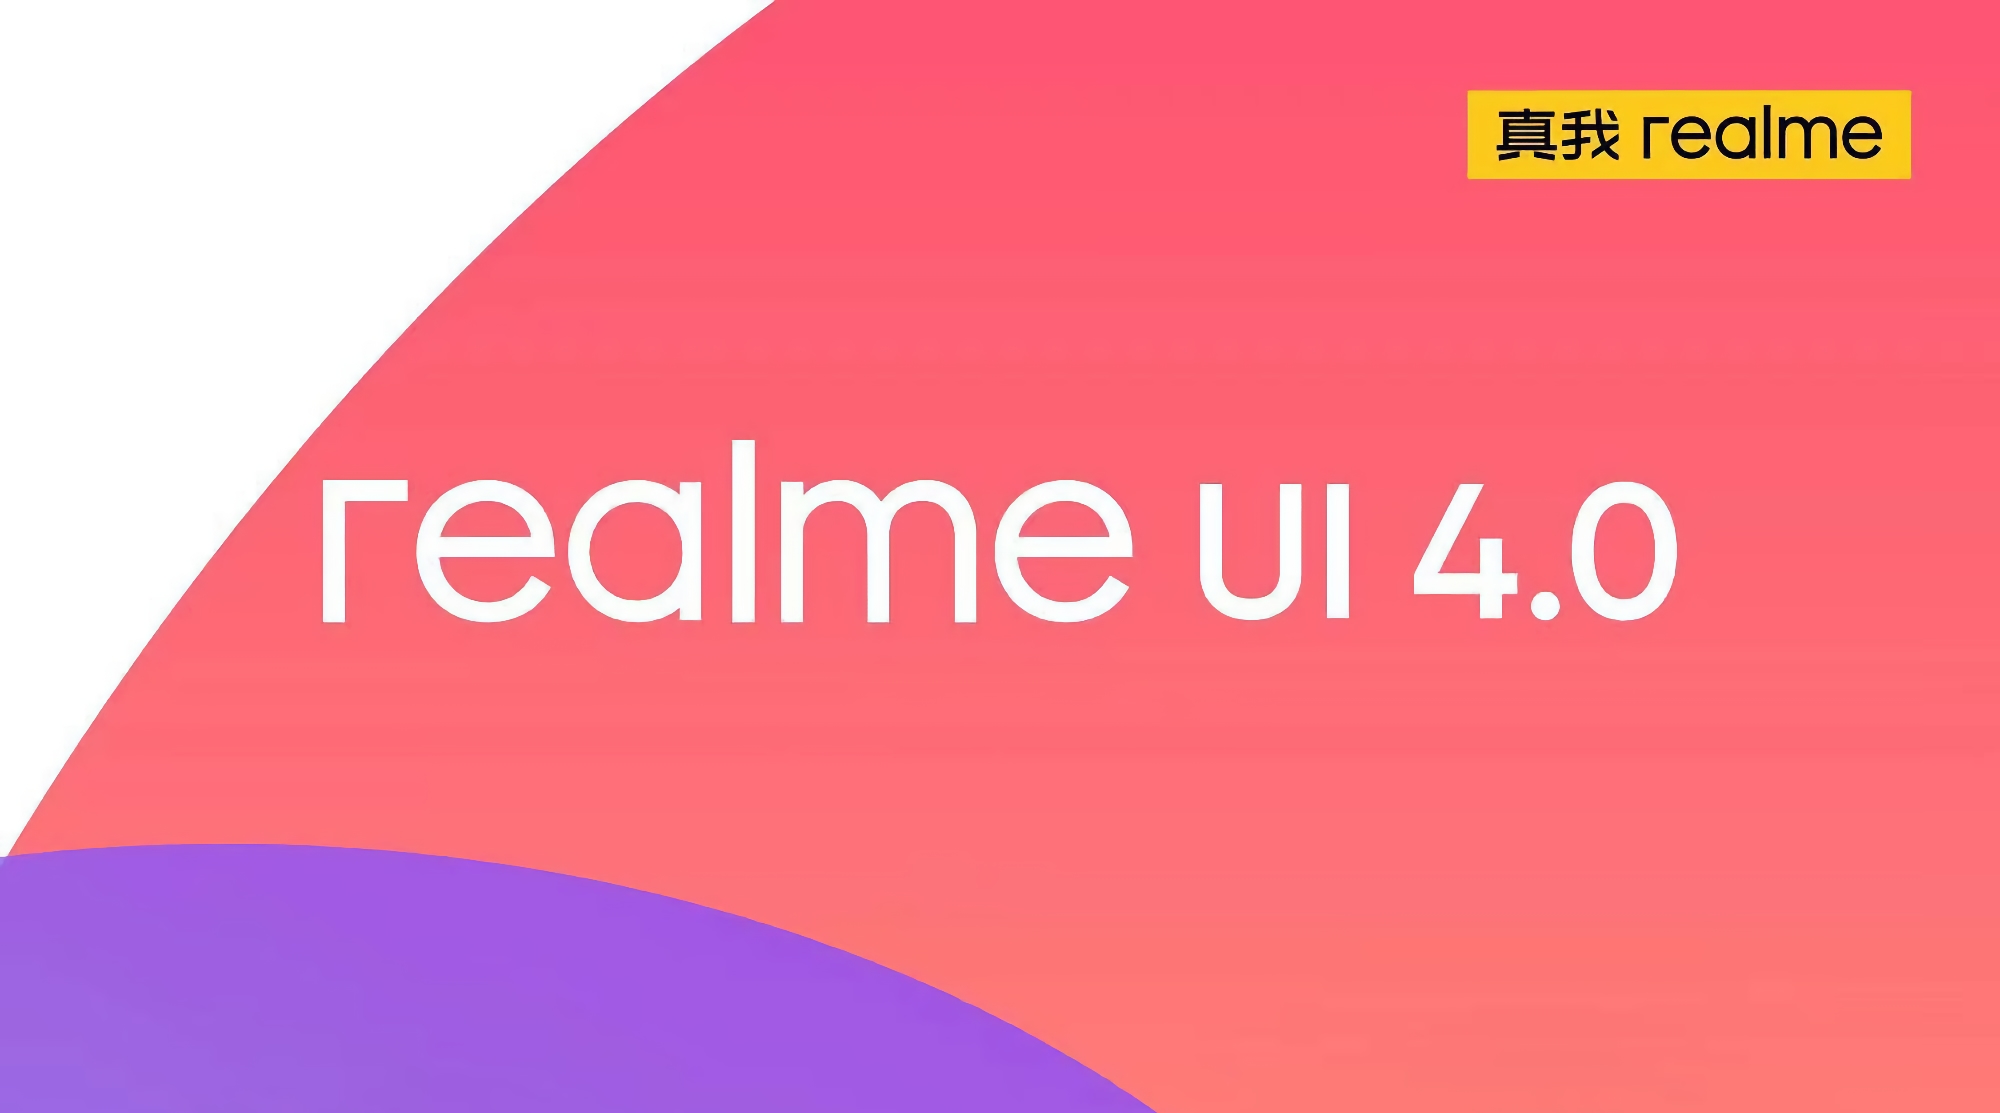 realme informed when they would introduce filmware realme UI 4.0 and which smartphones will receive it first